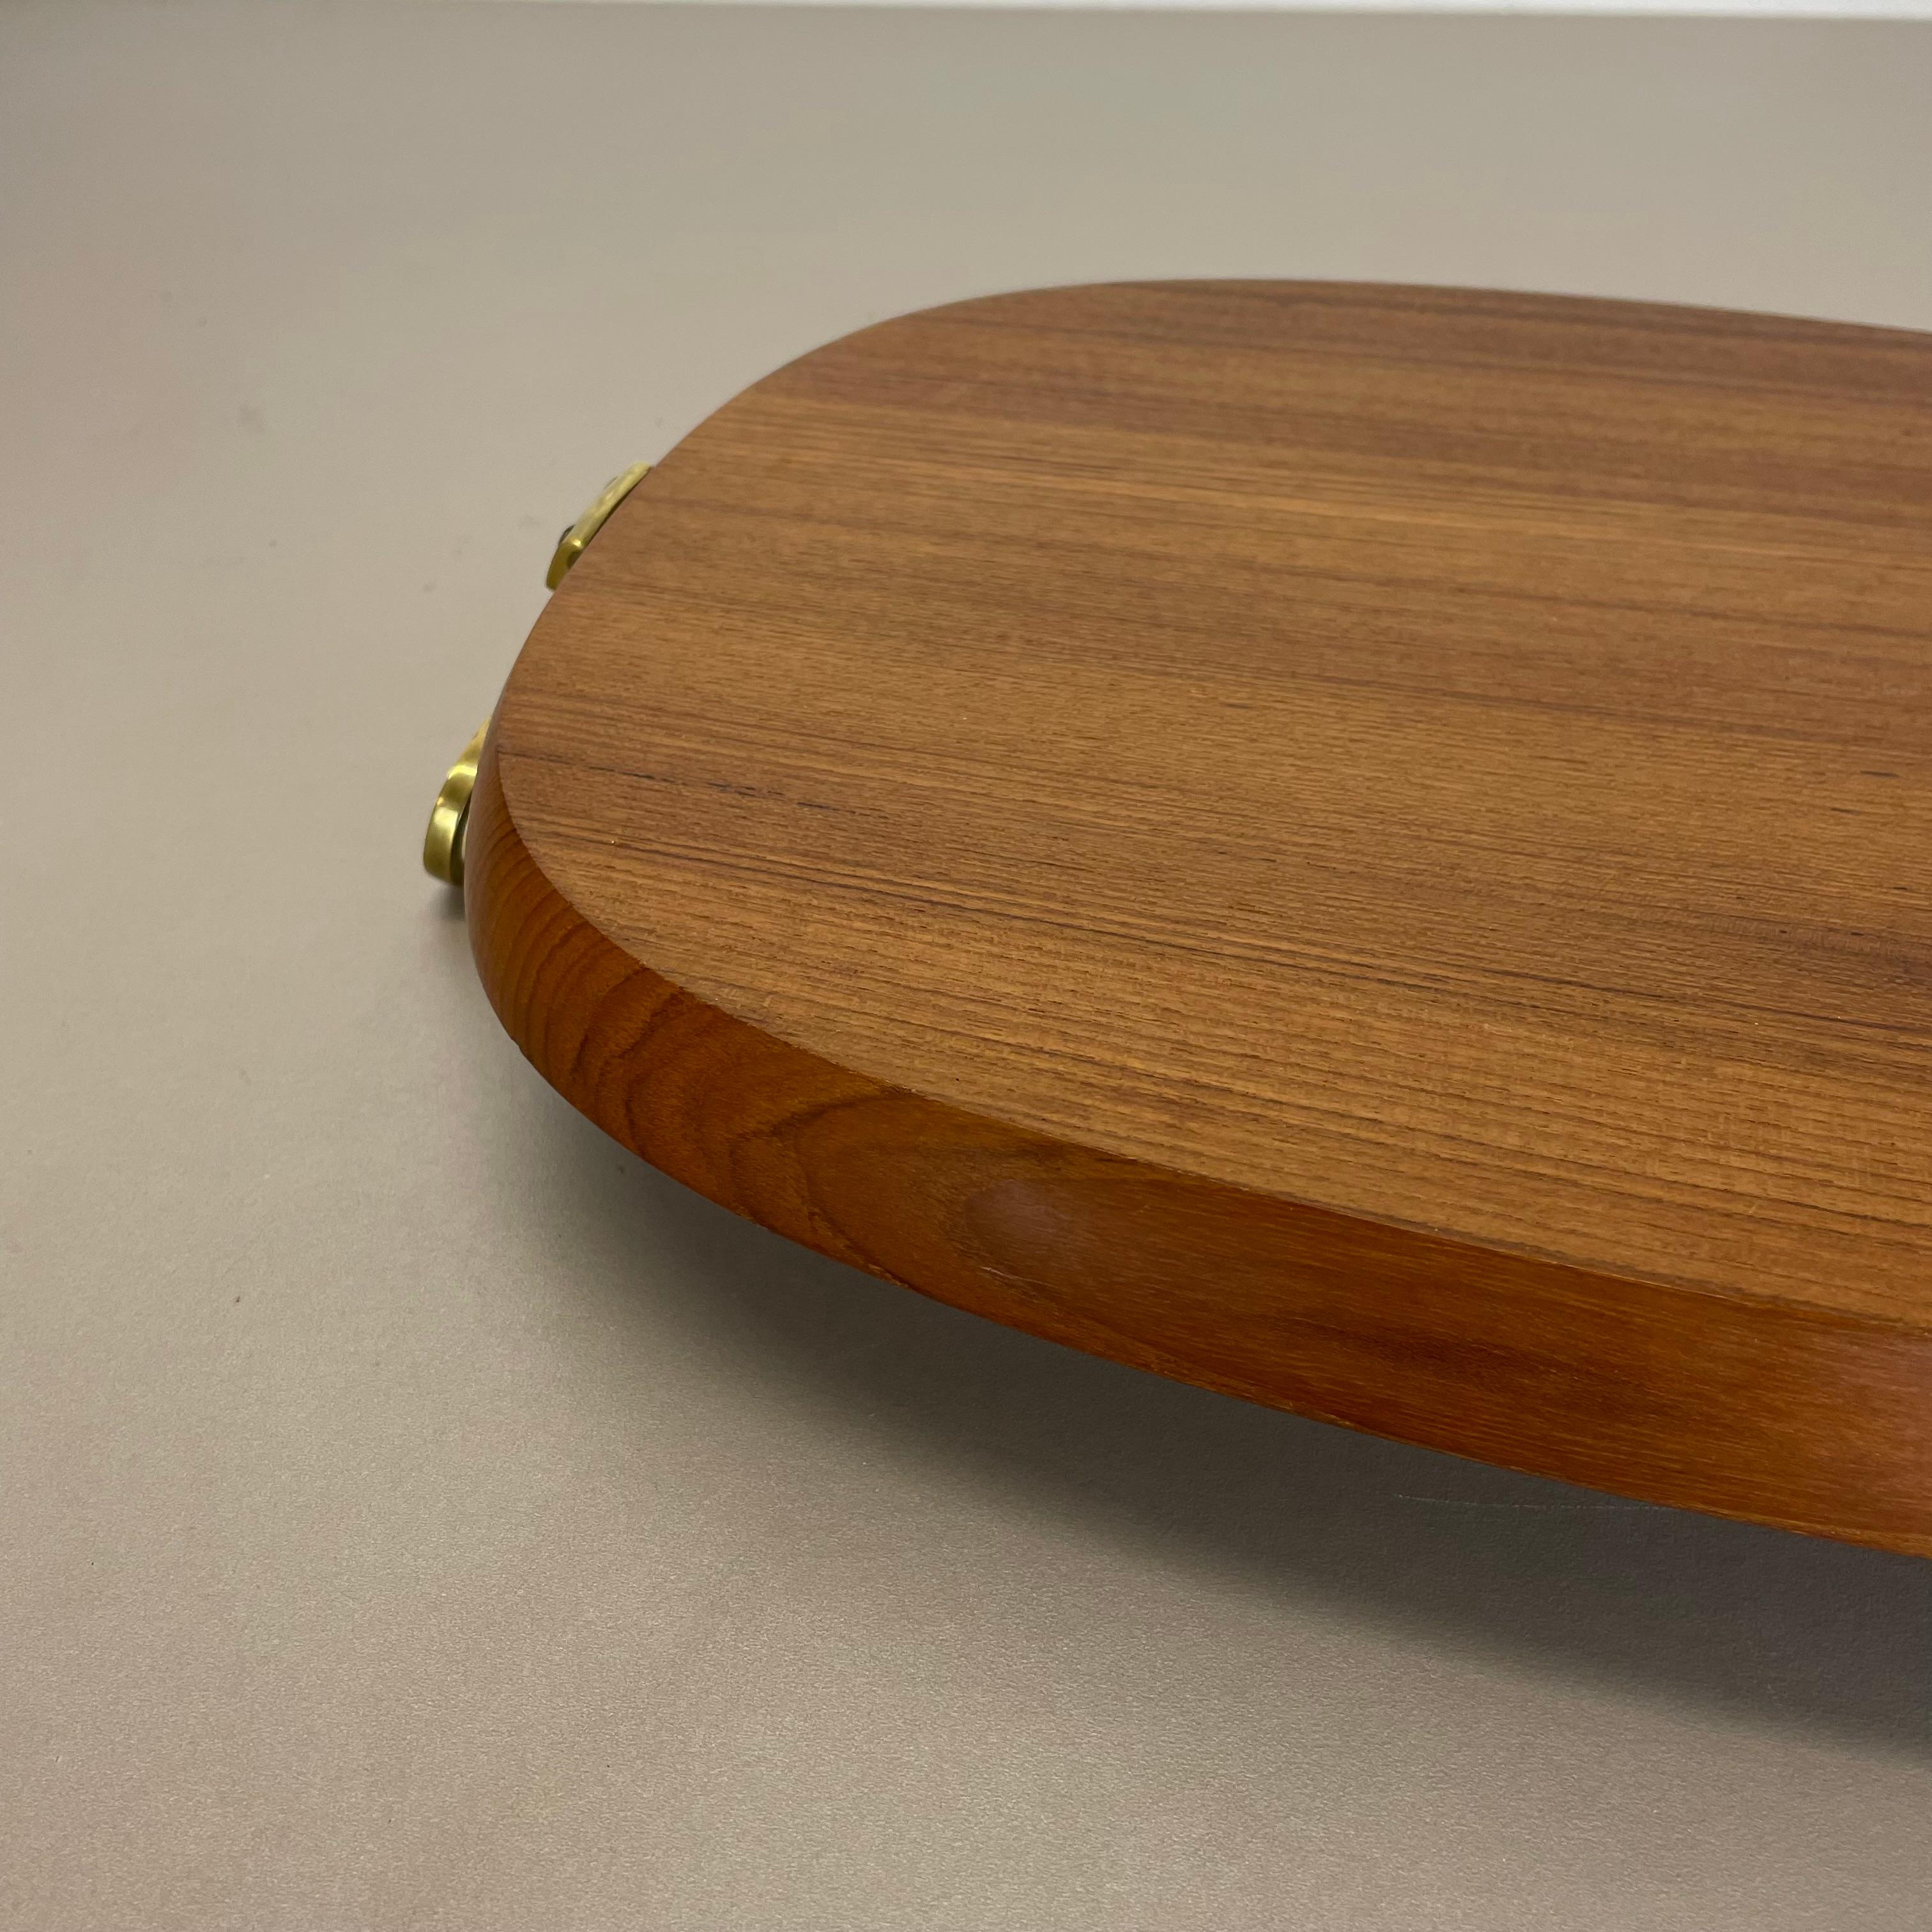 Large TEAK Tray Plate Element with Brass Handle by Carl Auböck, Austria, 1950s For Sale 10